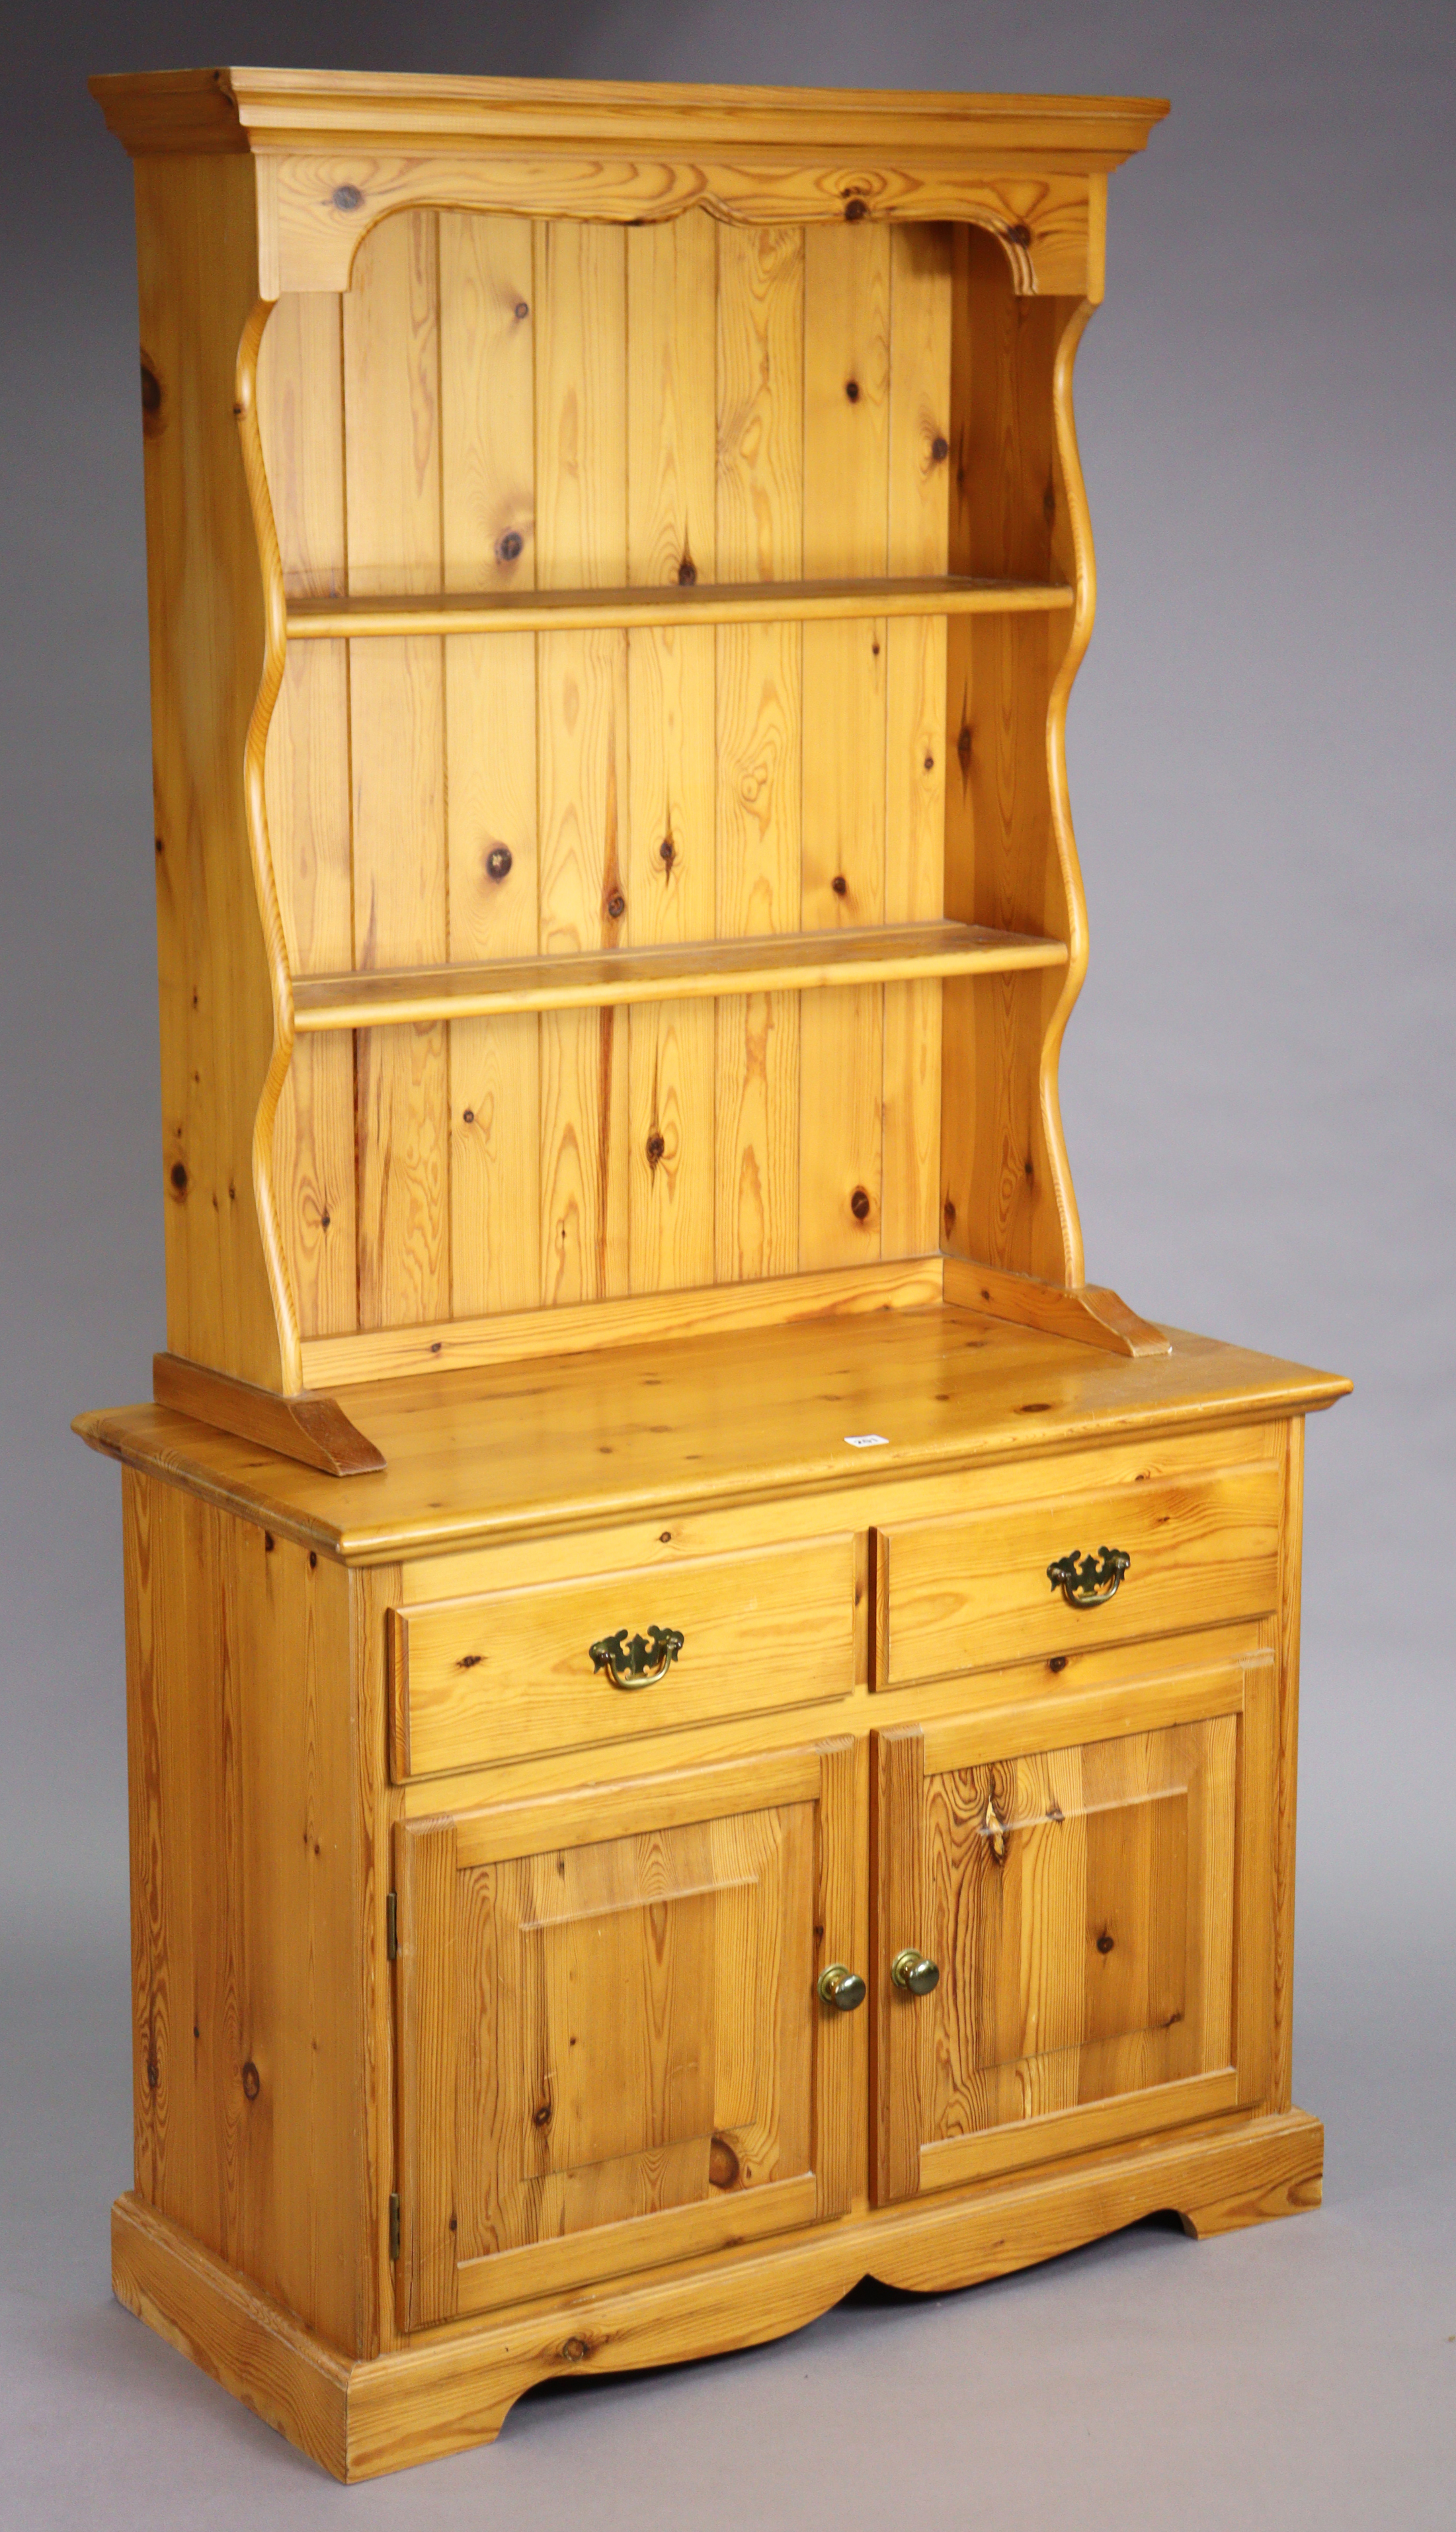 A pine small dresser the upper part with two open shelves & having a panelled base, the base